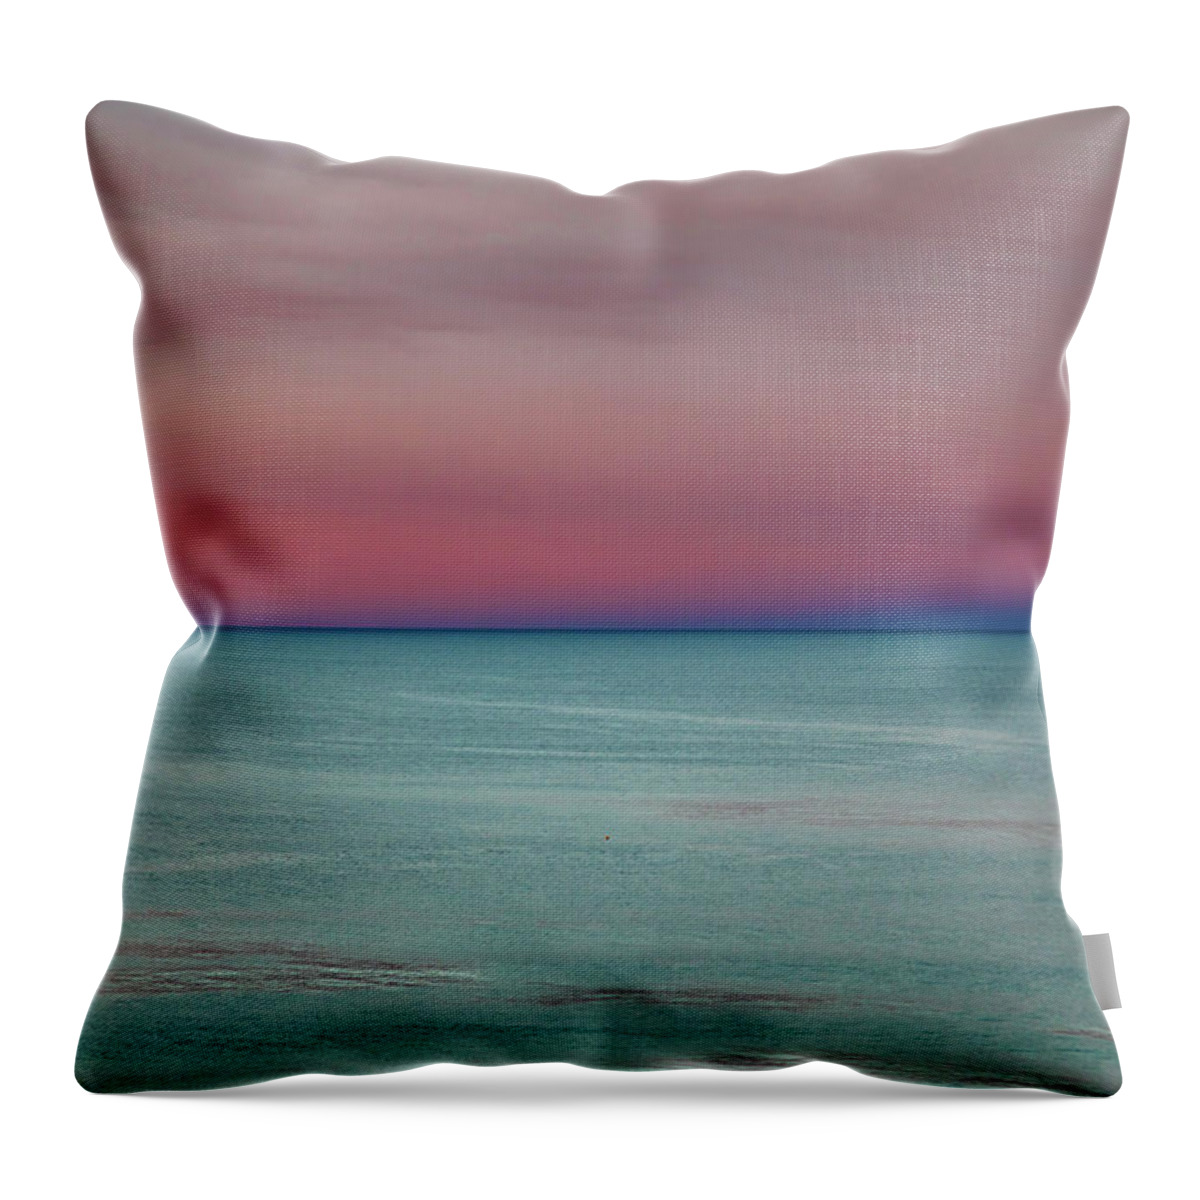 Pink Throw Pillow featuring the photograph Pastel Passions by Az Jackson